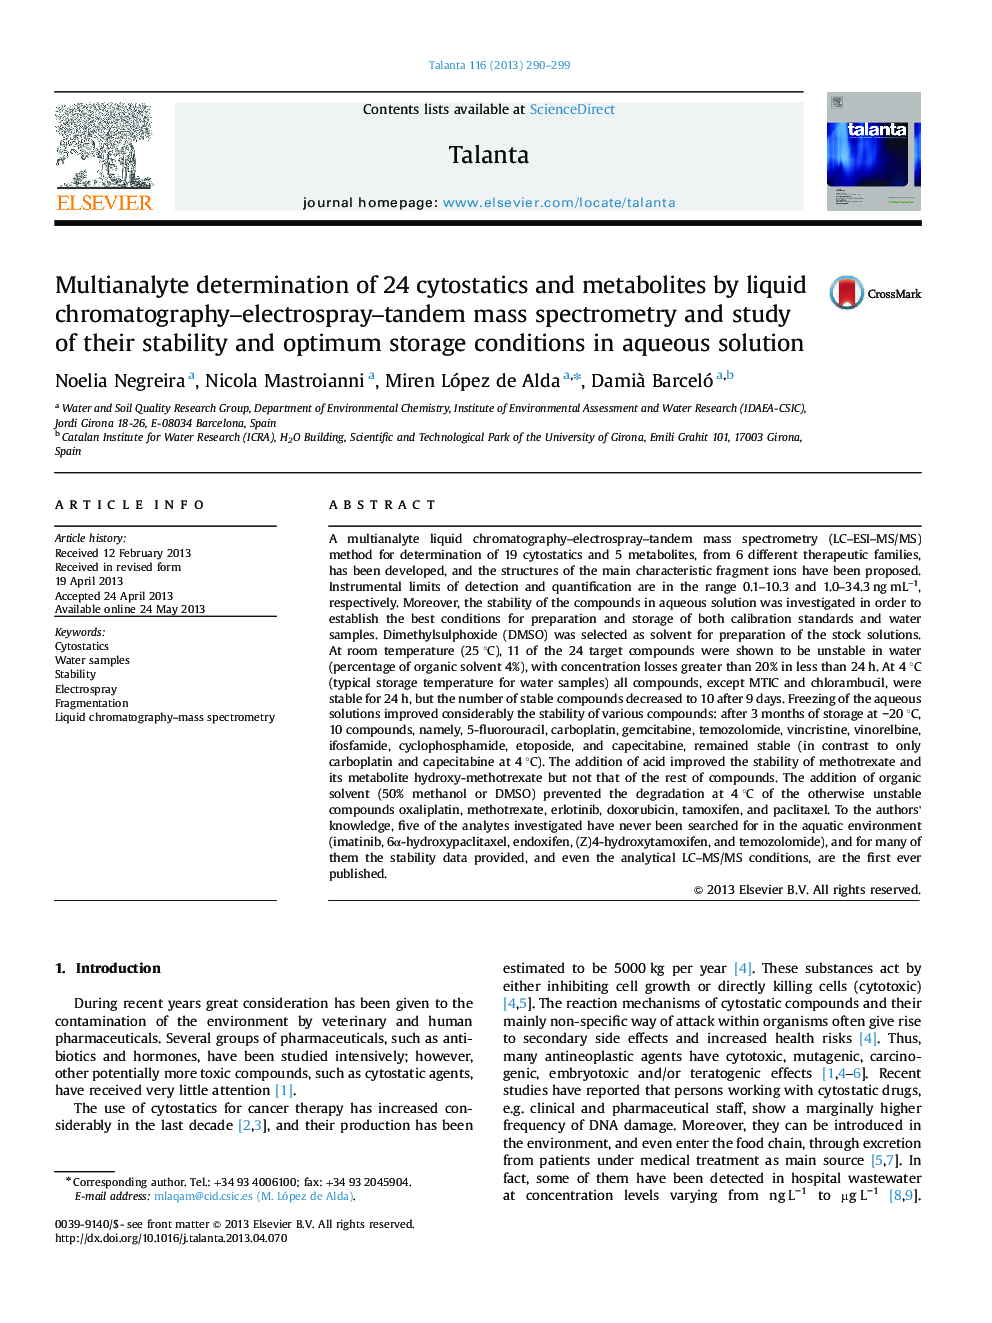 Multianalyte determination of 24 cytostatics and metabolites by liquid chromatography-electrospray-tandem mass spectrometry and study of their stability and optimum storage conditions in aqueous solution